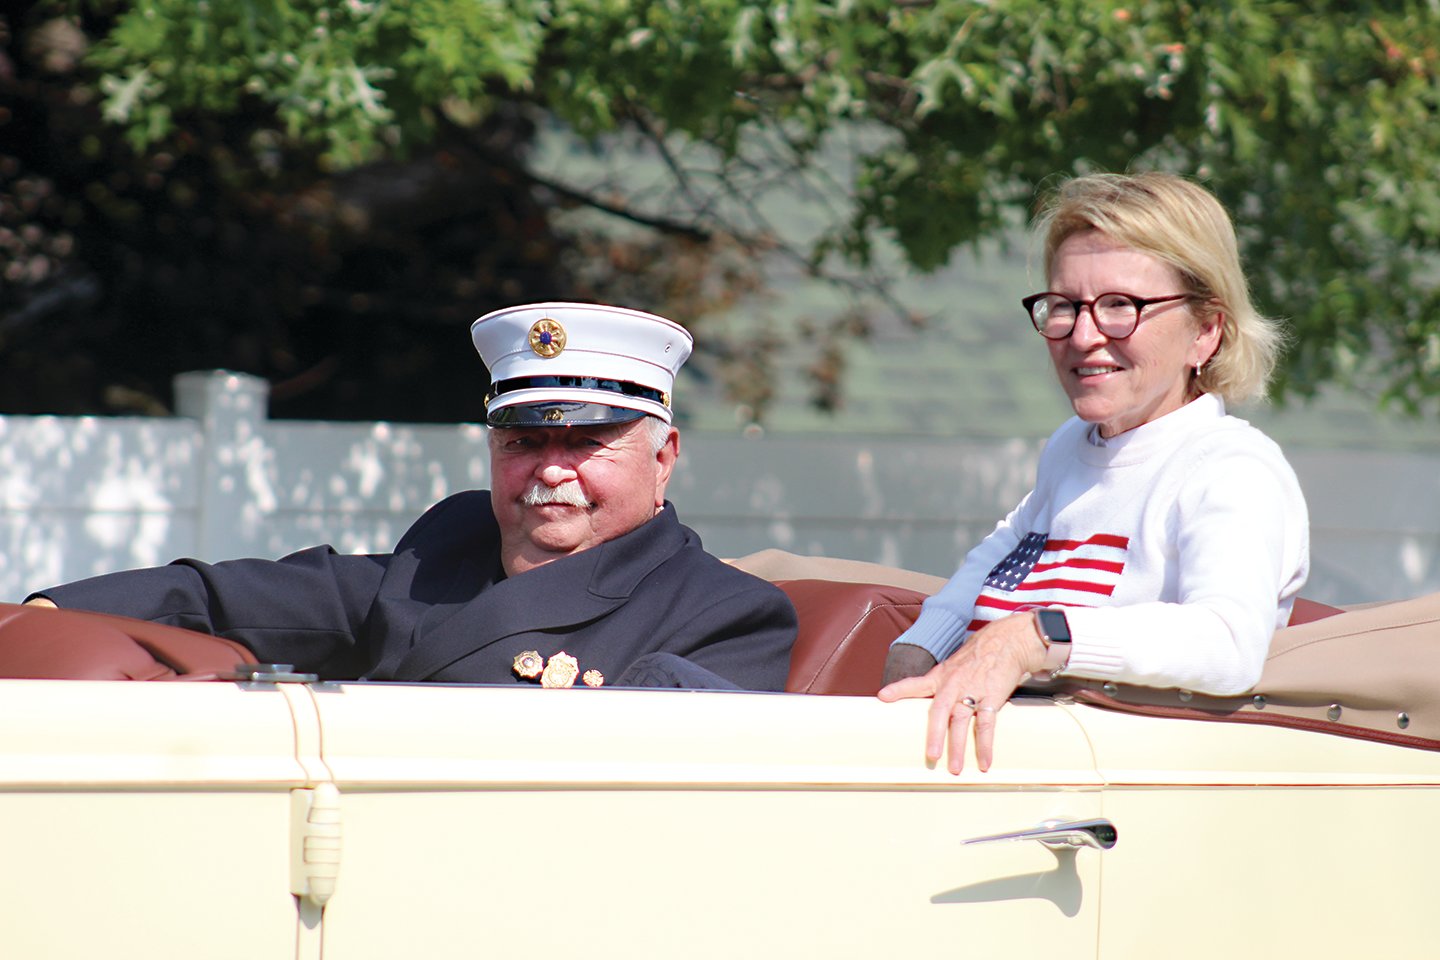 Second Division Grand Marshal, Past Chief Robert Keesler, rides alongside Assemblywoman Aileen Gunther.